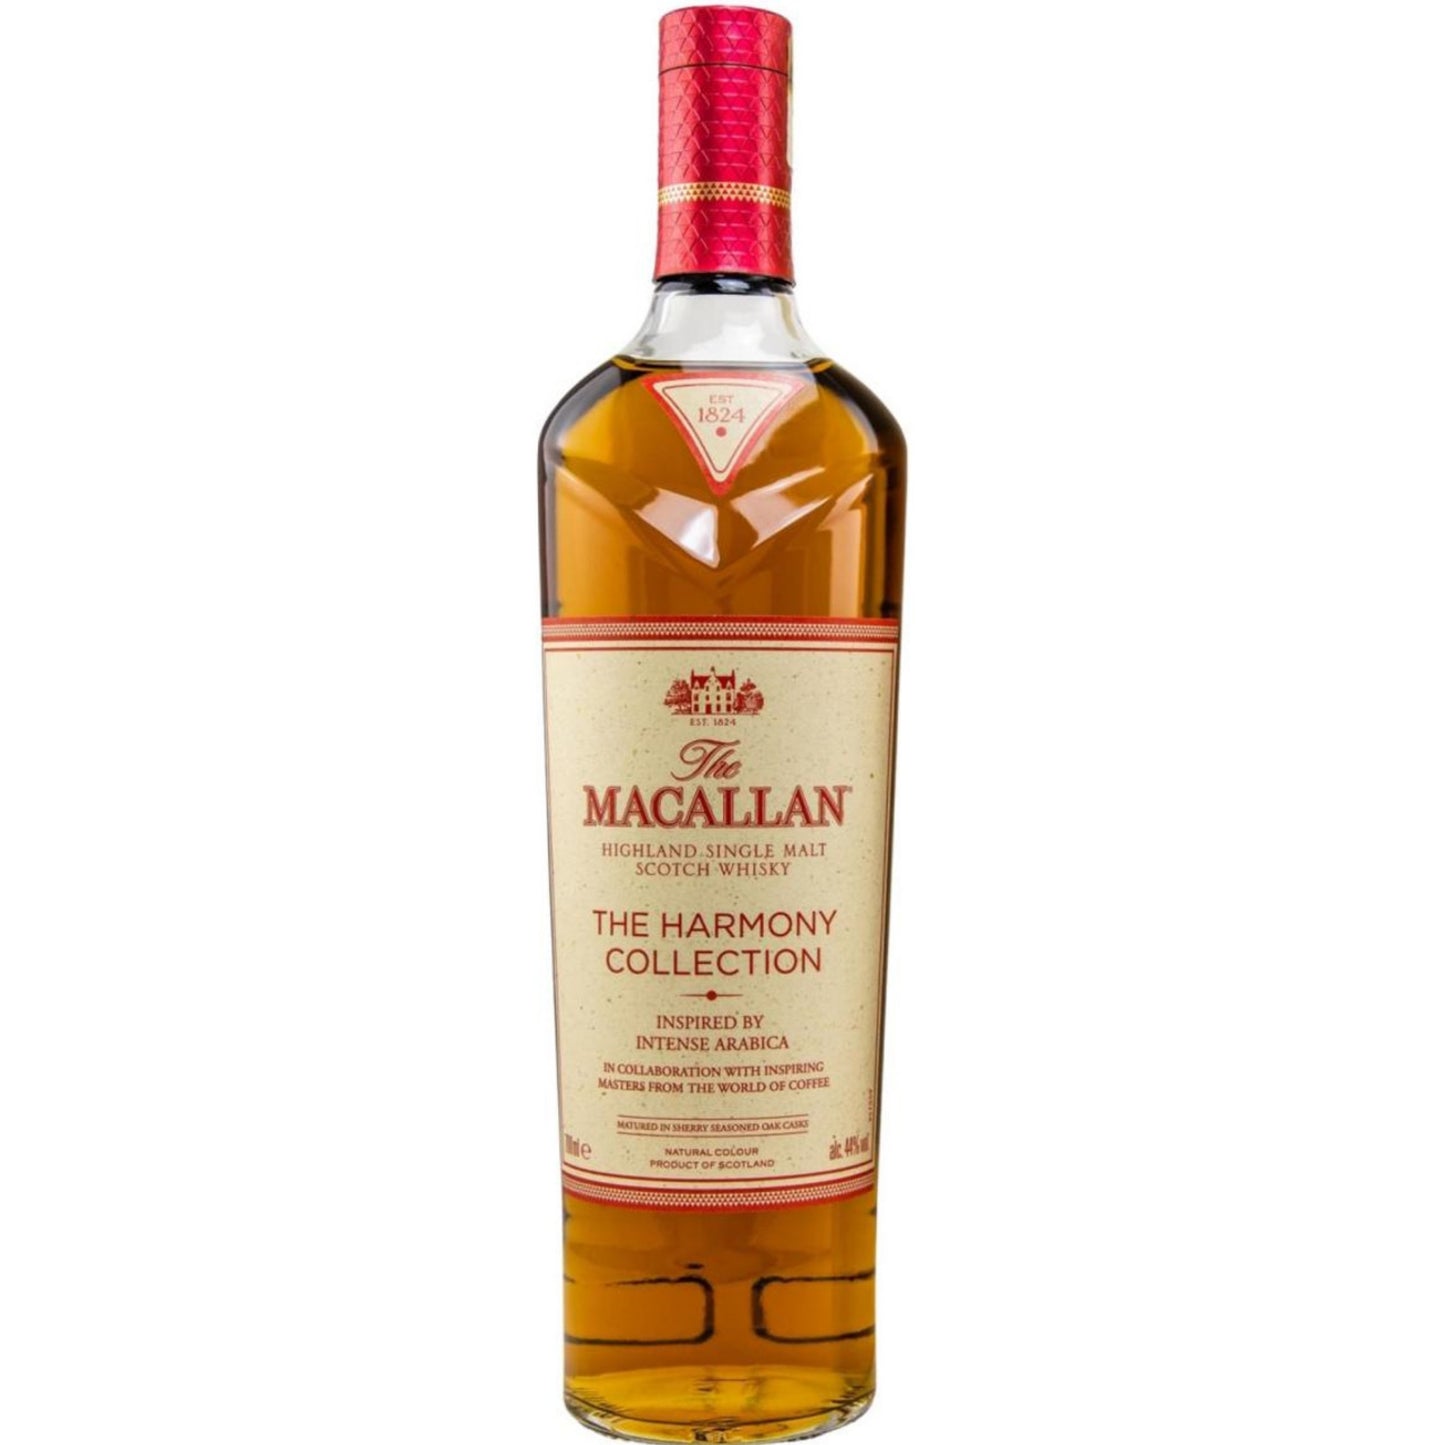 The Macallan Harmony Collection Inspired By Intense Arabica - Liquor Geeks